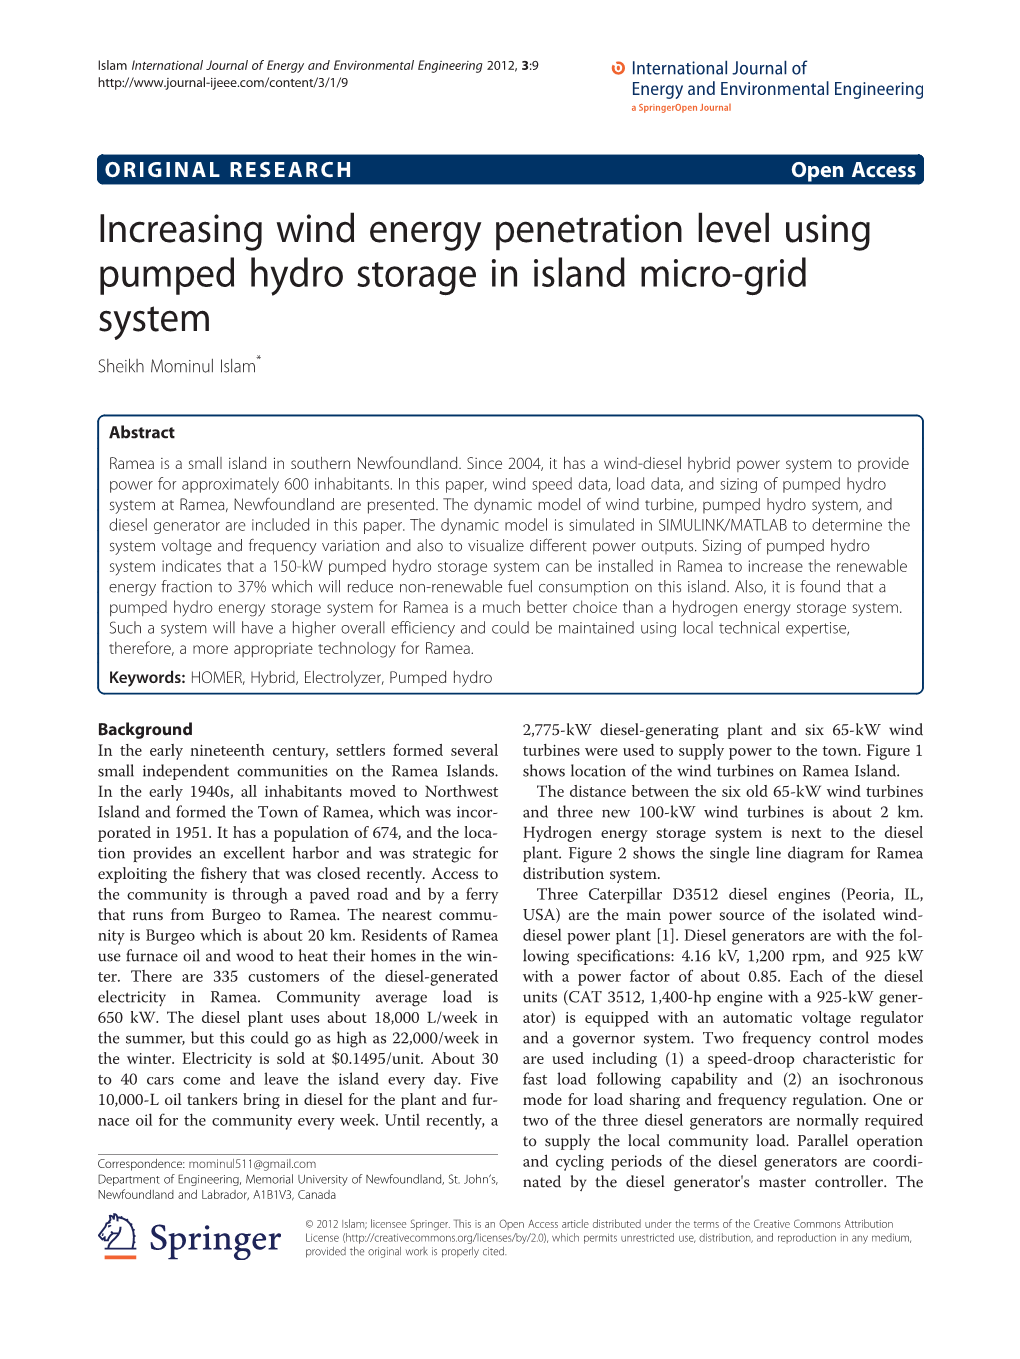 Increasing Wind Energy Penetration Level Using Pumped Hydro Storage in Island Micro-Grid System Sheikh Mominul Islam*